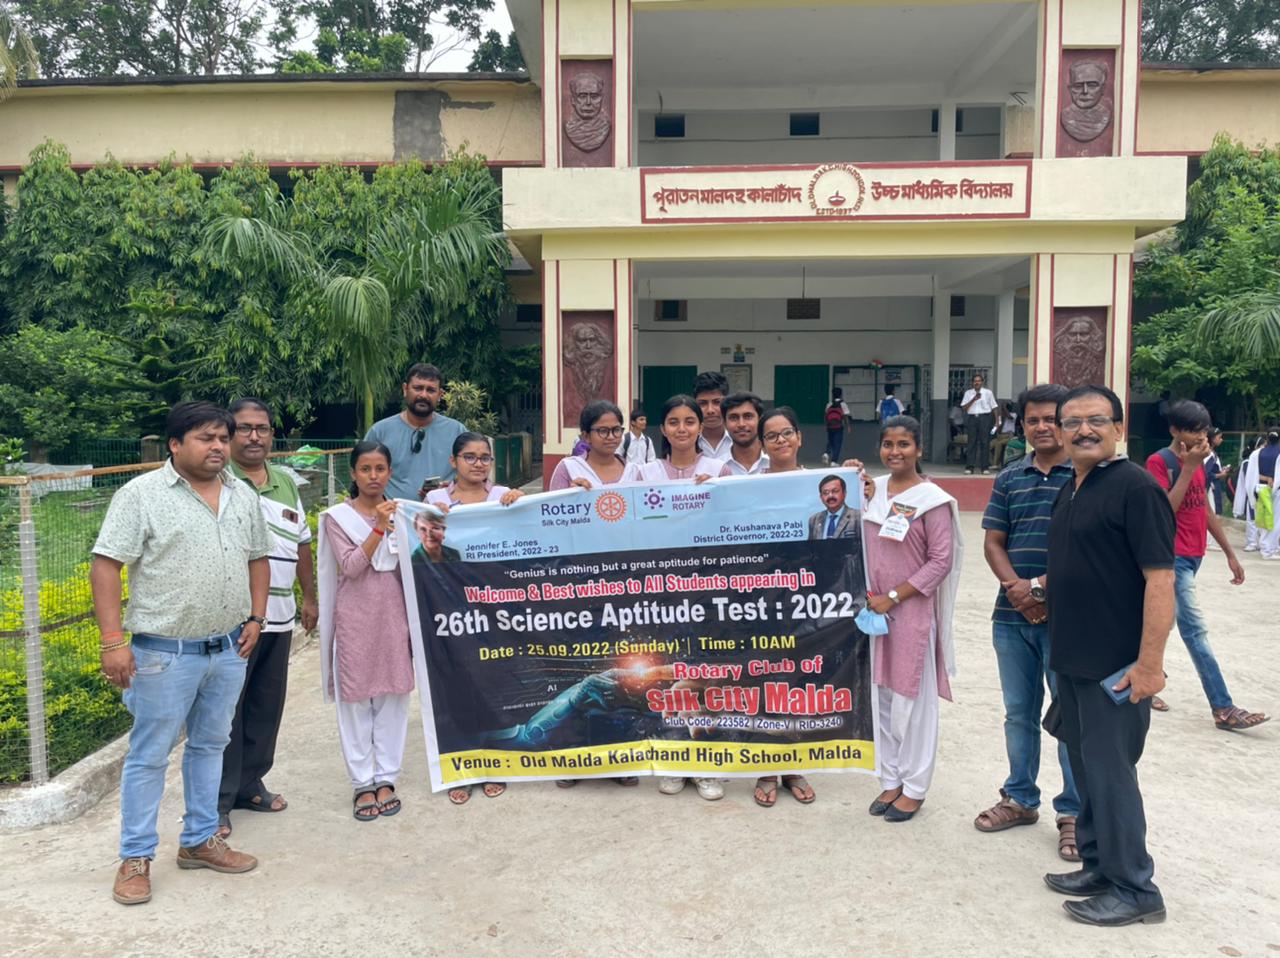 Welcome & Best wishes to All Students Appearing in @ 26th Science Aptitude Test: 2022